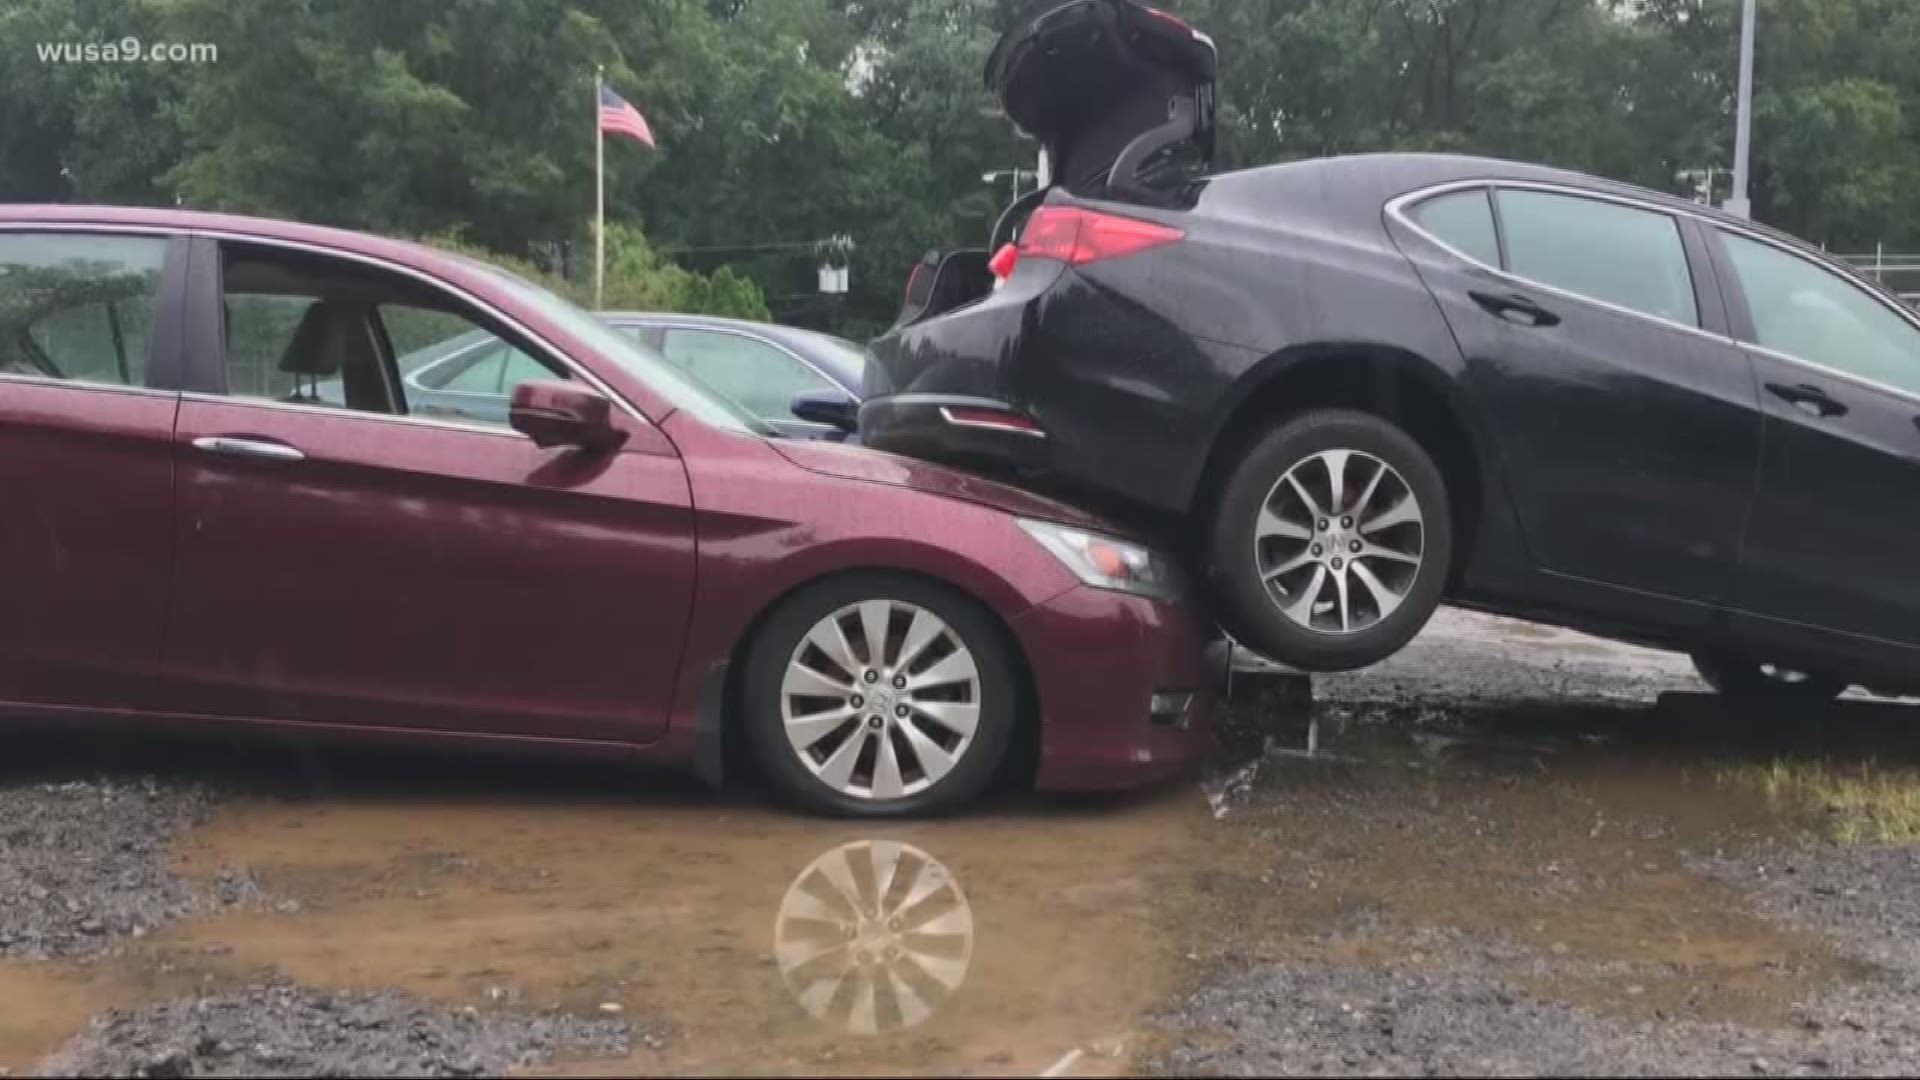 Some residents in Arlington County are still dealing with issues from a major flood in July. But help is here. The County is opening a flood recovery center to help those in need.